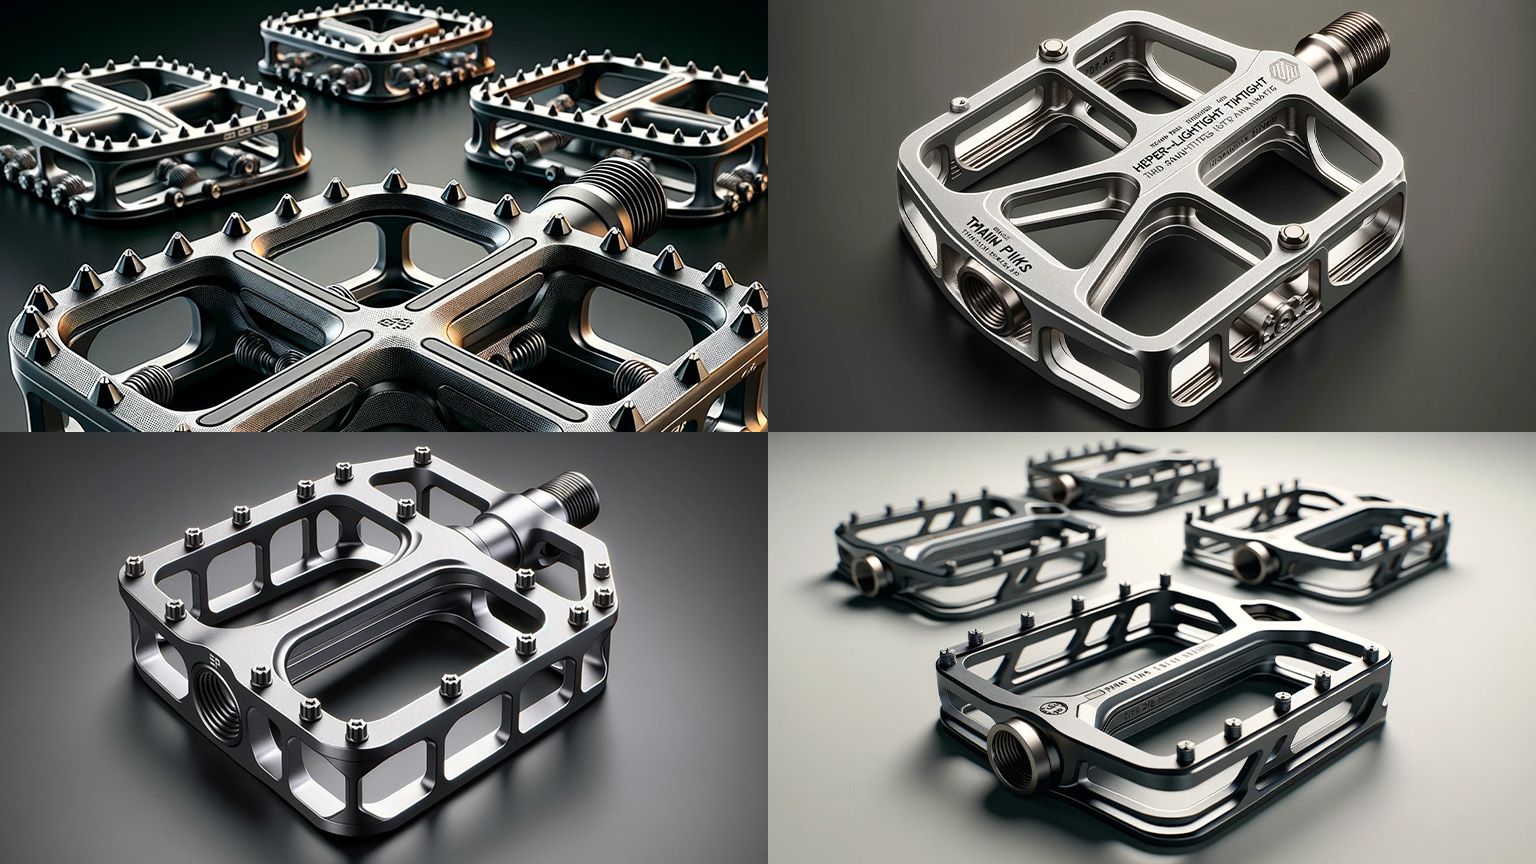 A series of four images depicting ten titanium bicycle pedals developed by iteratively prompting generative AI. The ten pedals display numerous design variations and flaws including inconsistencies in the size and shape of studs and the structural supports connecting the top and bottom plates, and, in one case, an axle housing that ends midway across the pedal.